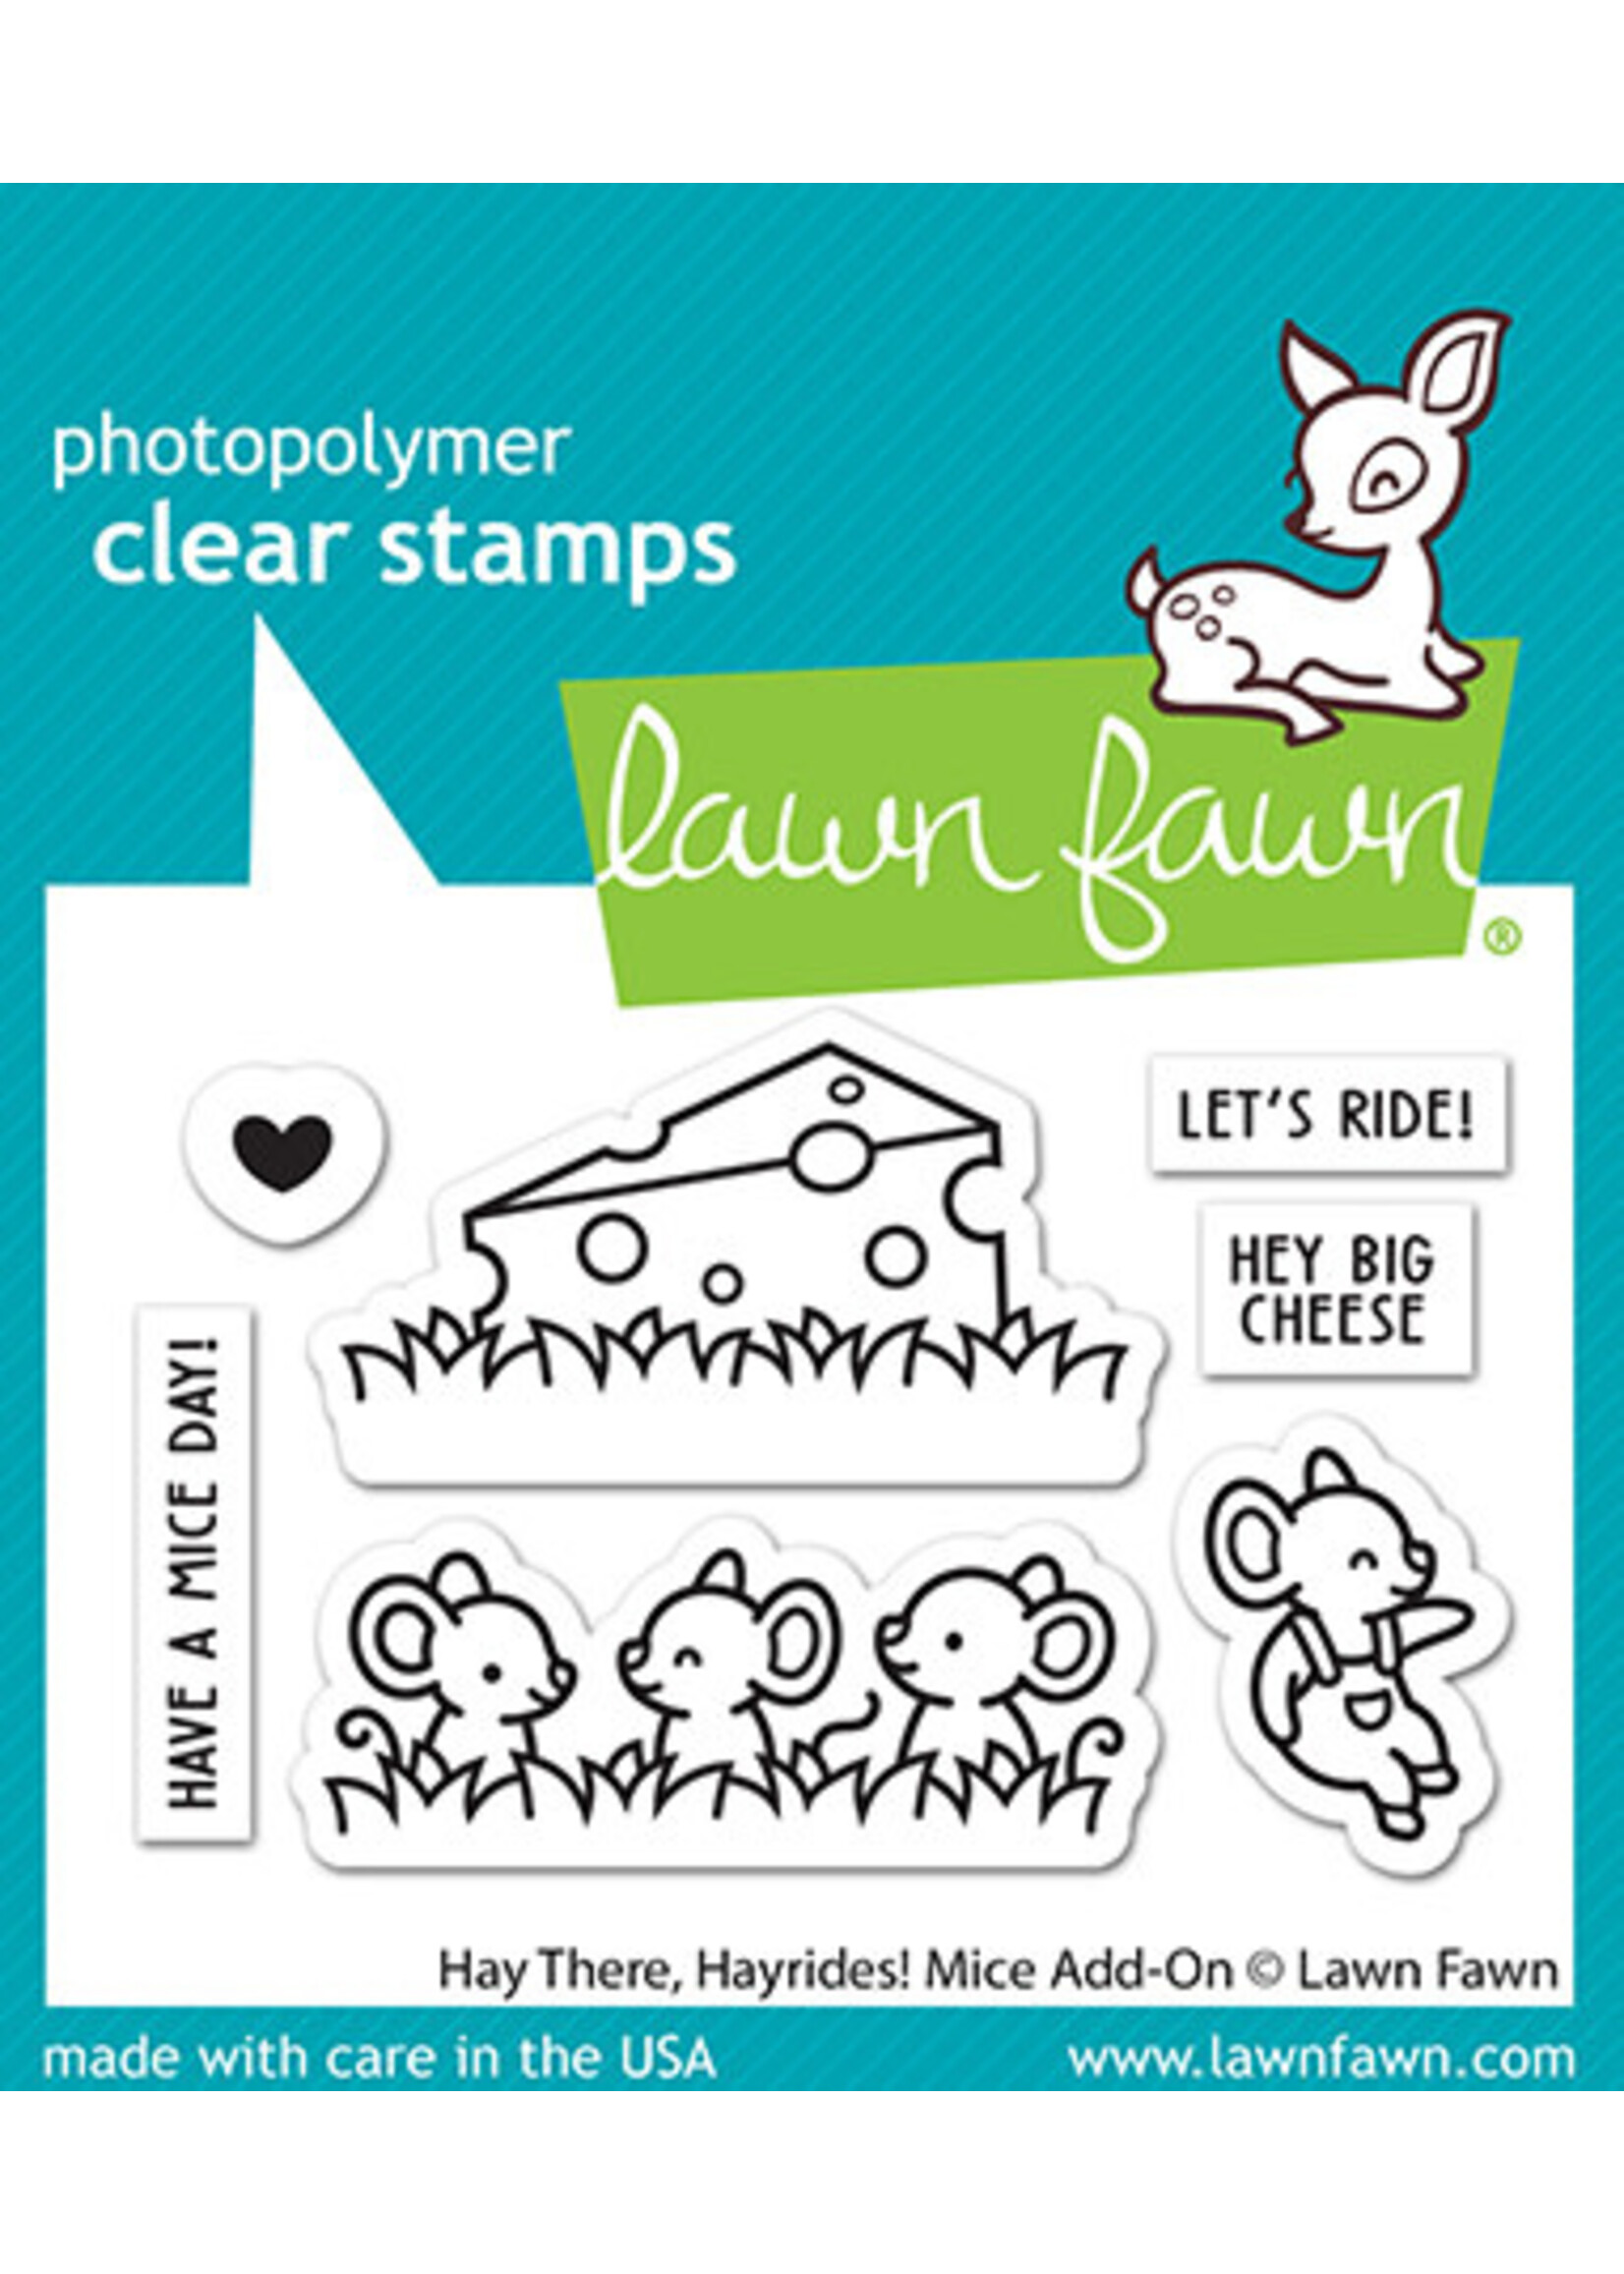 Lawn Fawn hay there, hayrides! mice add-on stamp